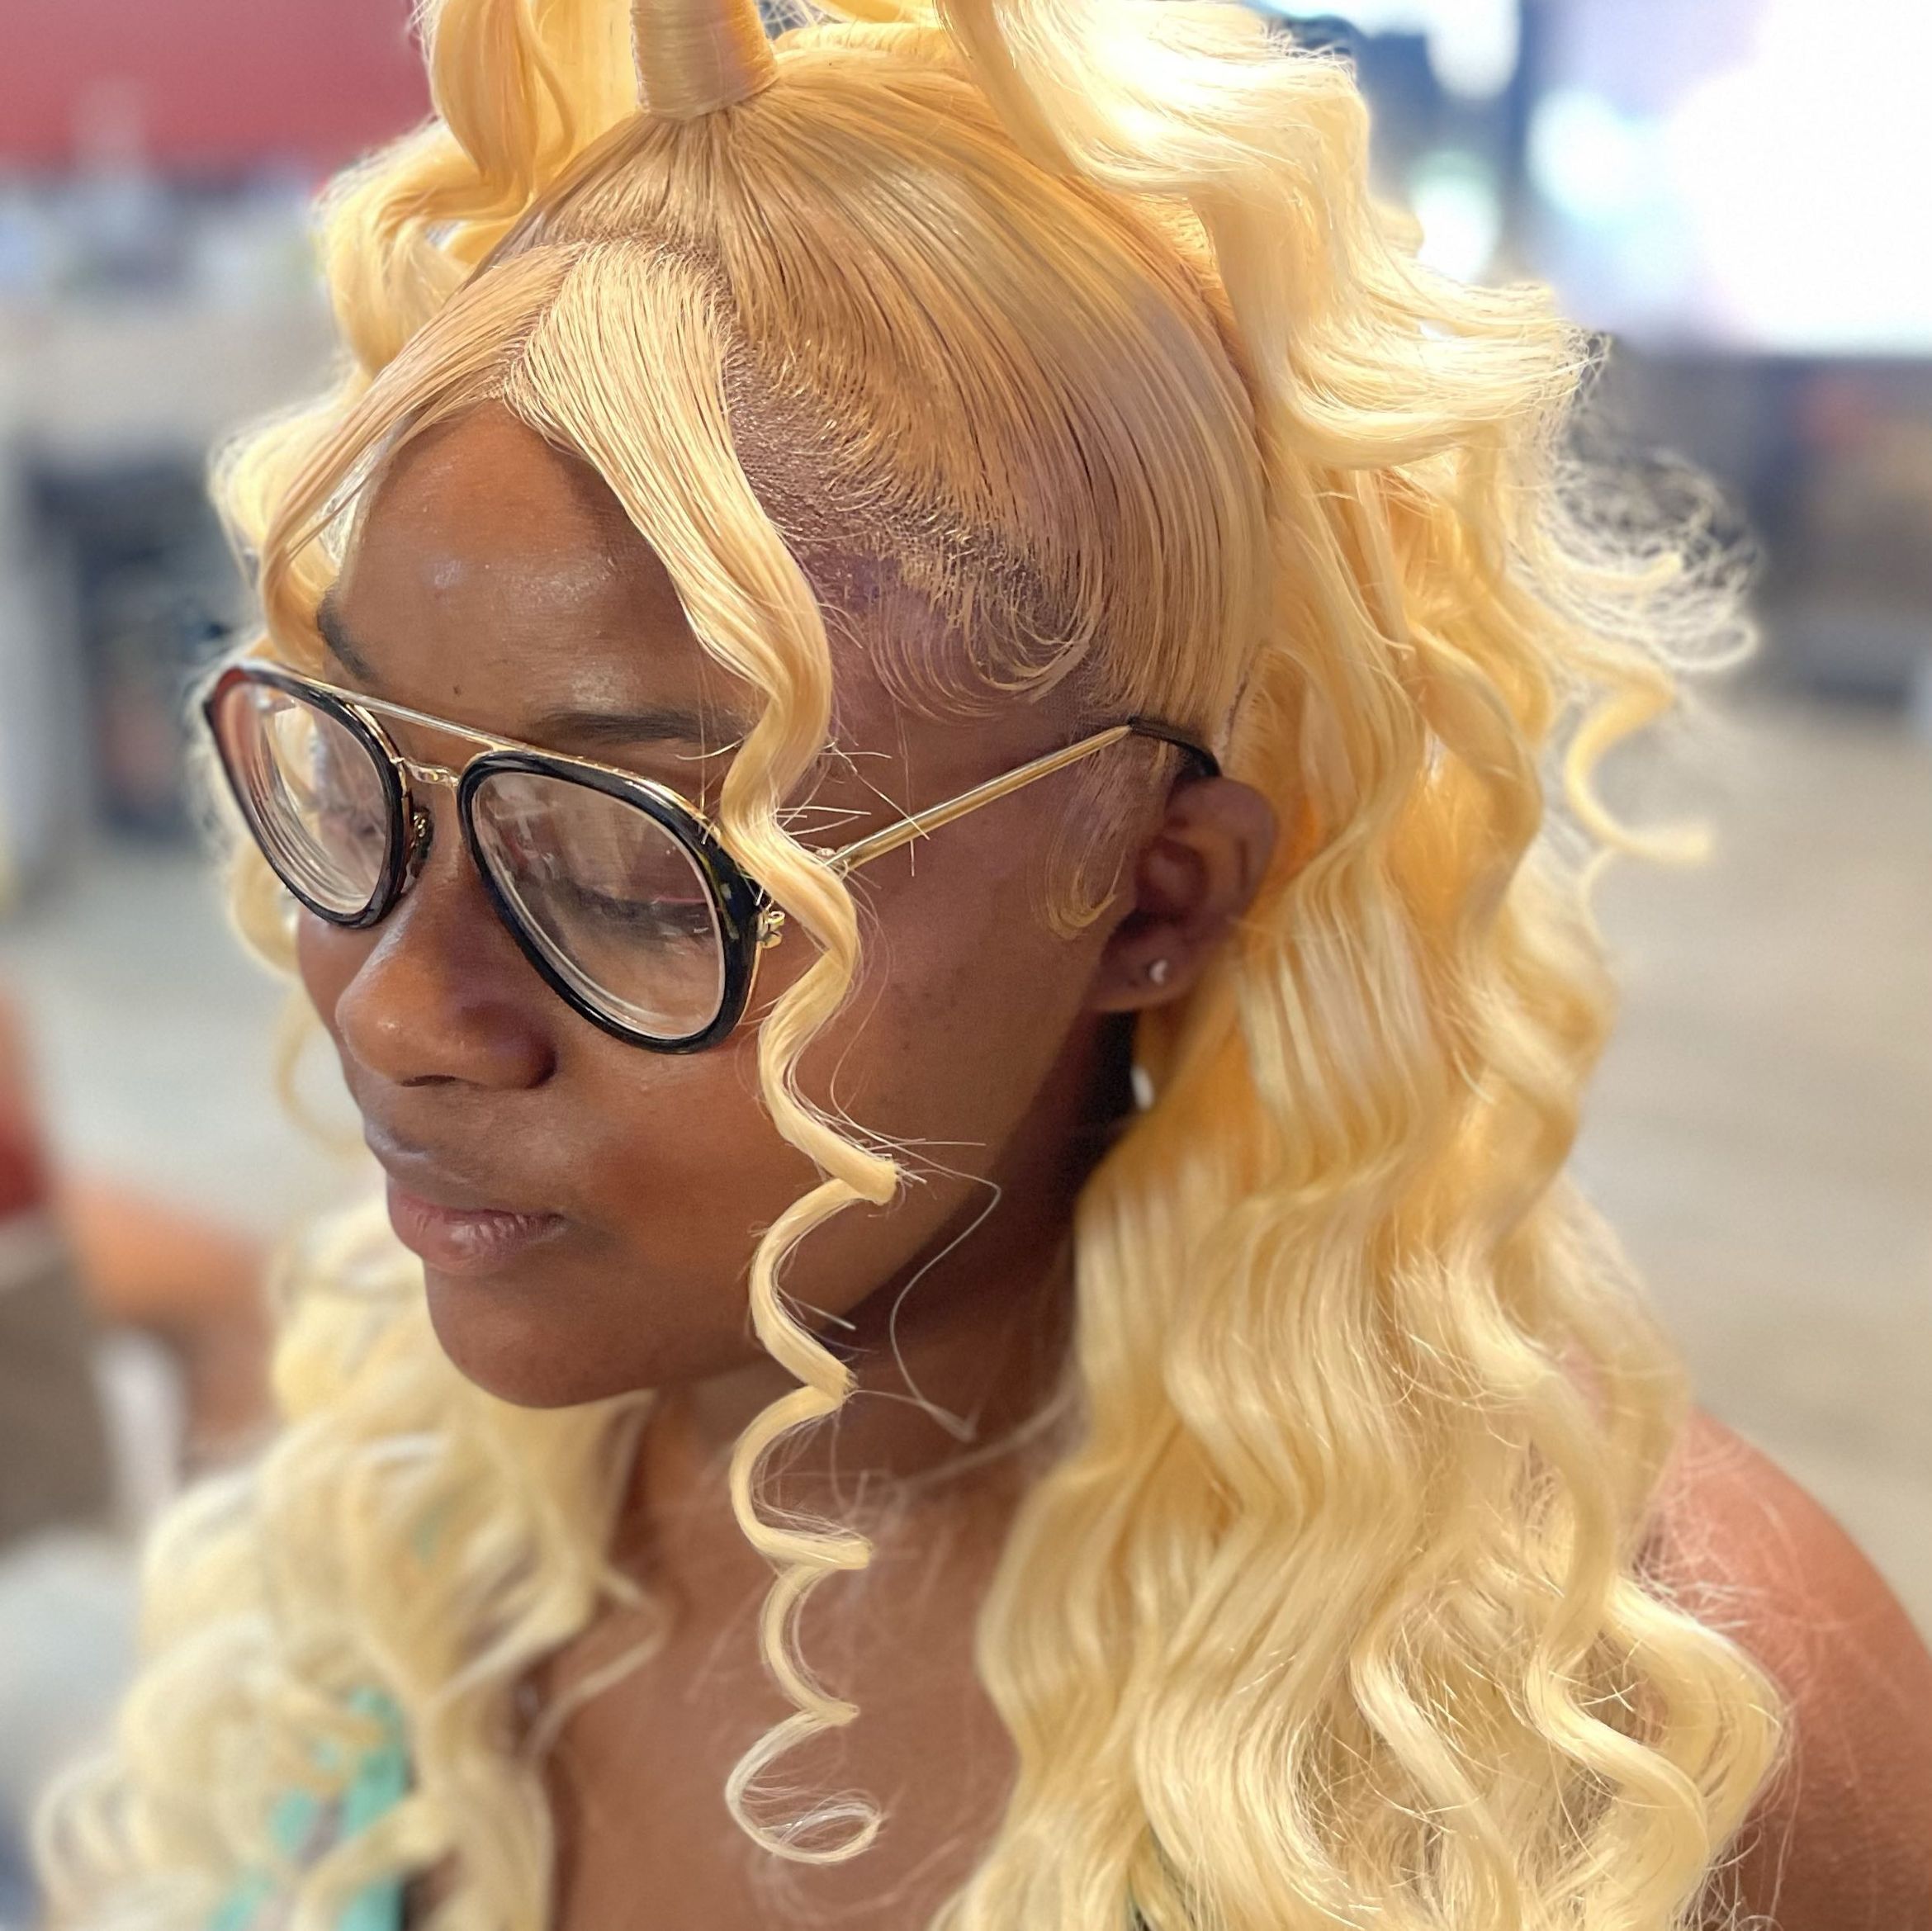 Application of lace wig/part an no style portfolio